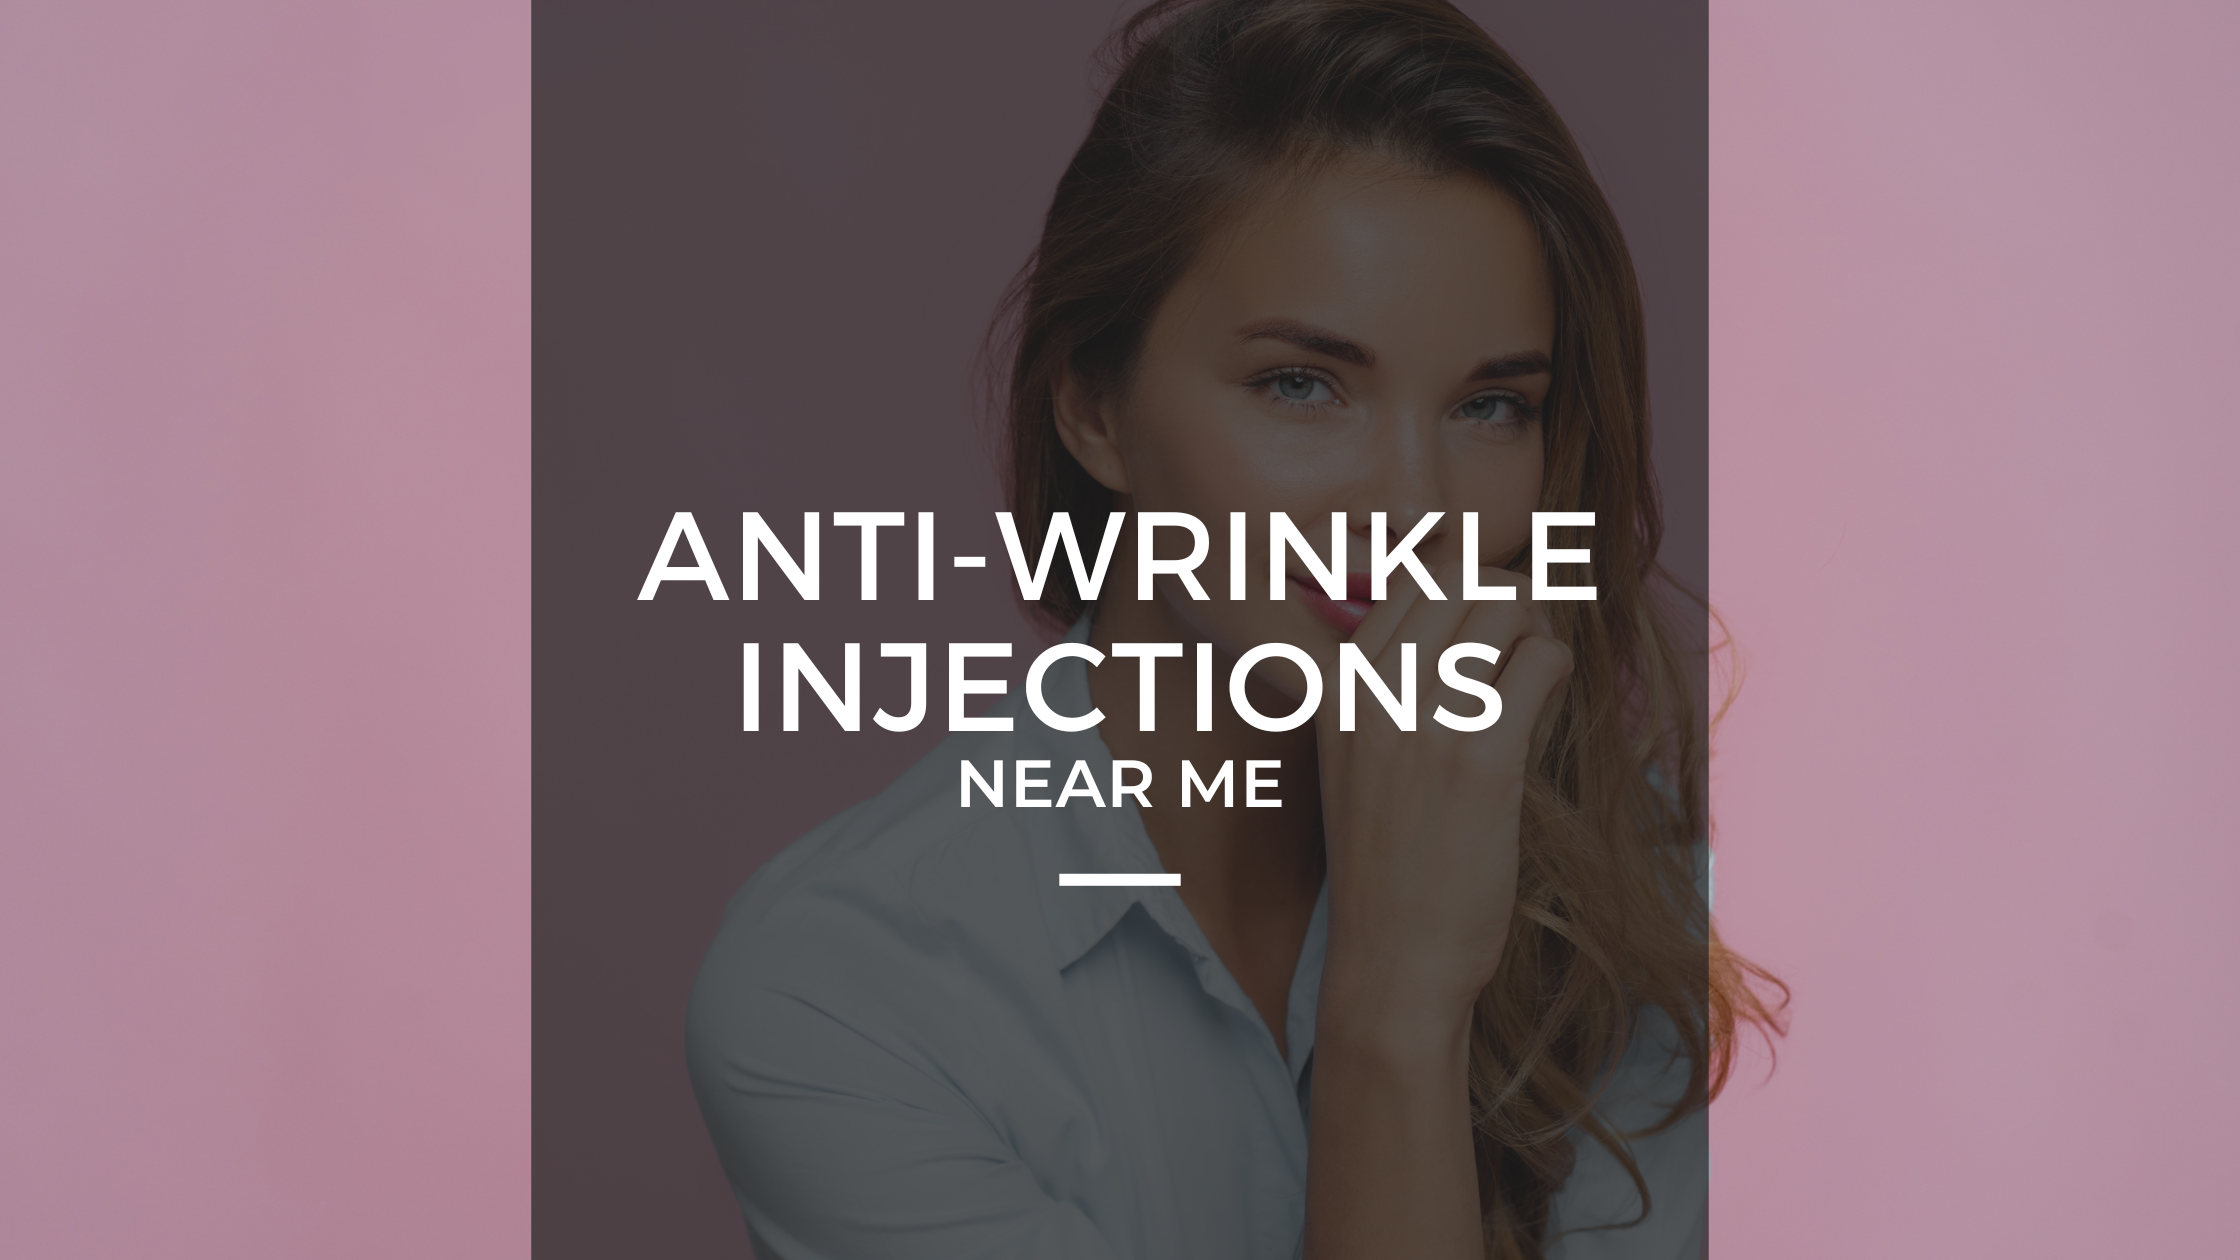 Anti-wrinkle injections near me